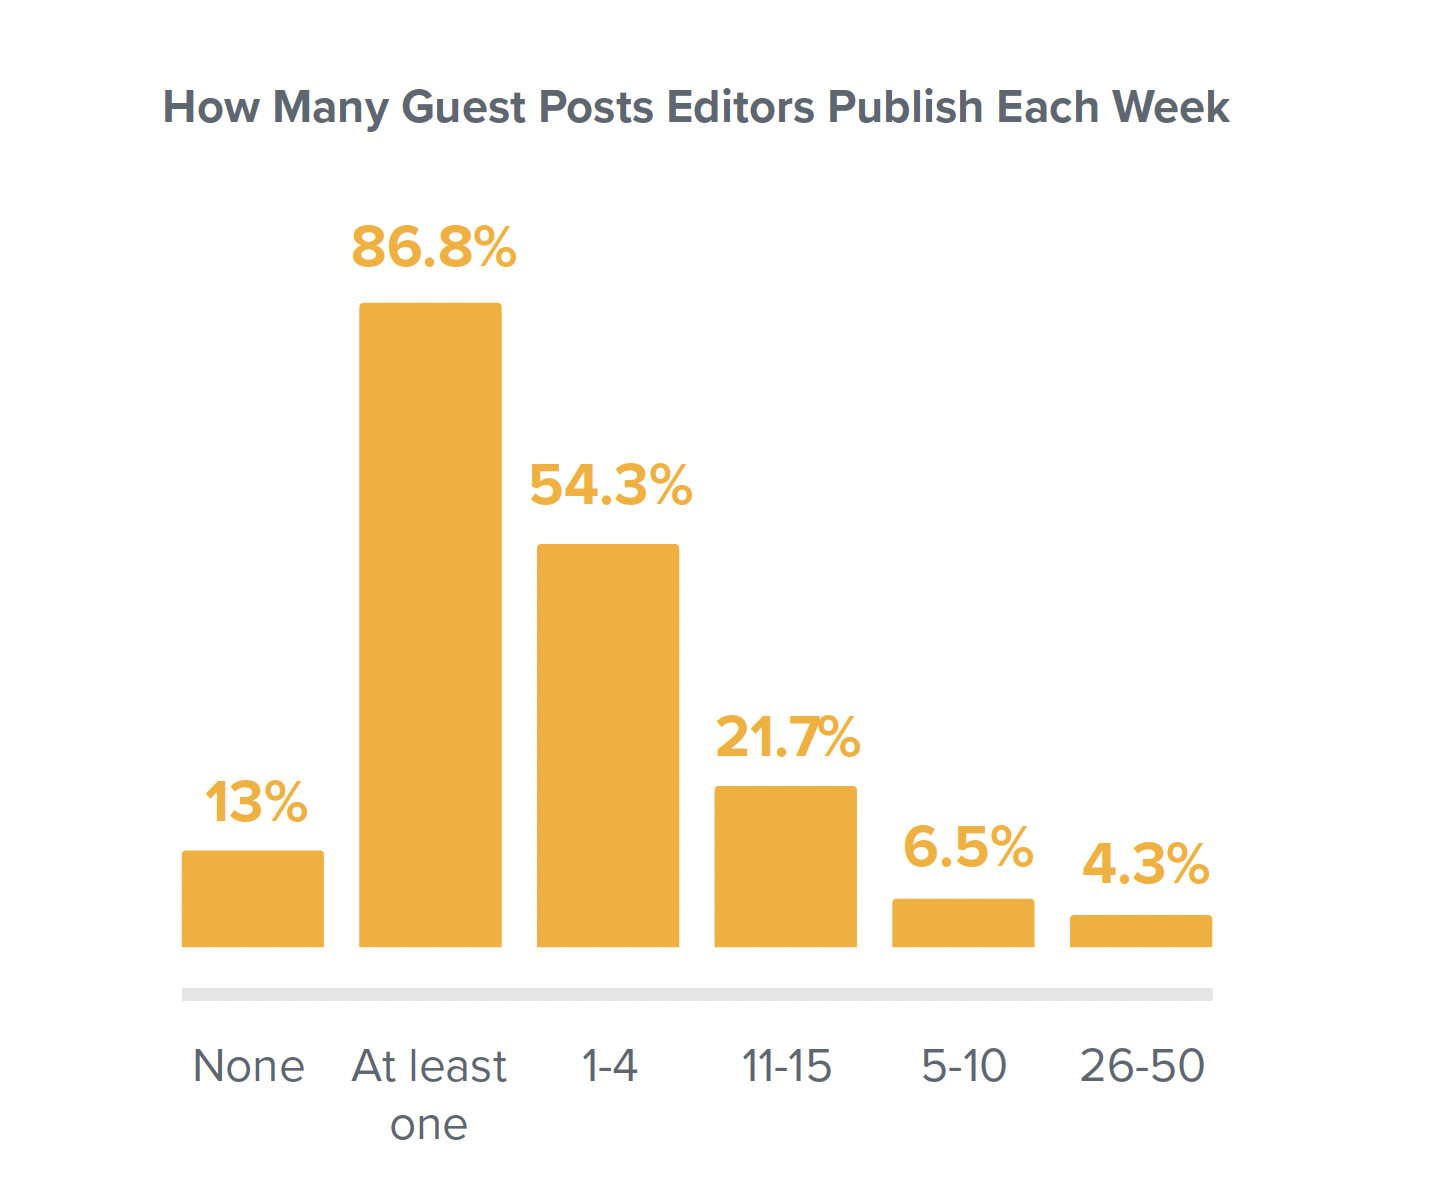 How Many Guest Posts Editors Publish Each Week. None: 13%. At least one: 86.8%. 1-4: 54.3%. 11-15: 21.7%. 5-10: 6.5%. 26-50: 4.3%.